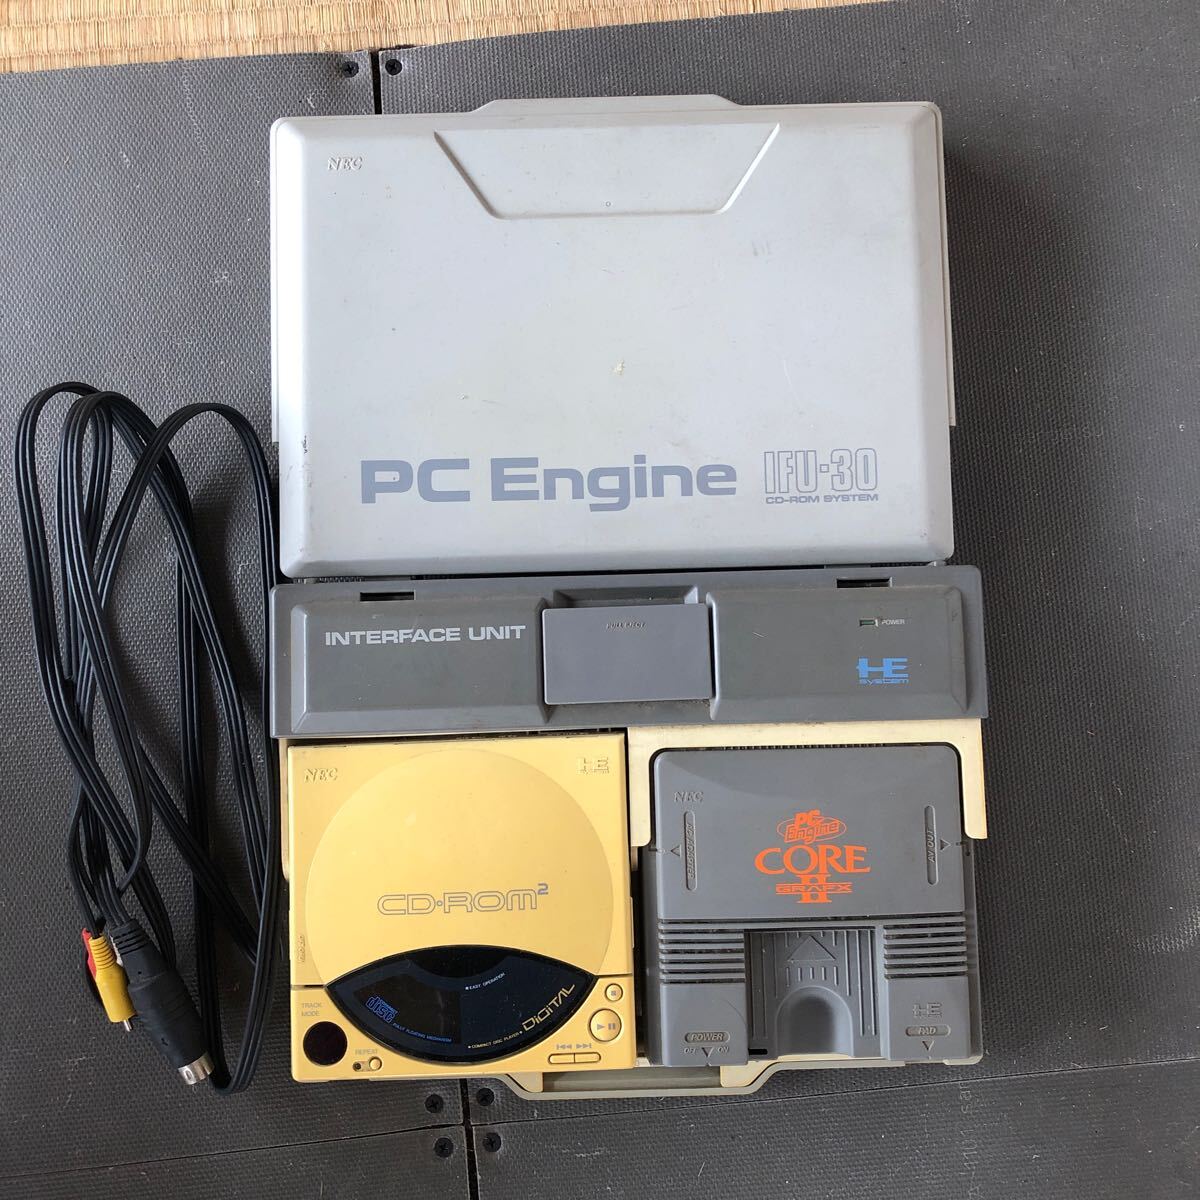 [ Junk ]NEC PC engine PC Engine IFU-30 CD-ROM SYSTEM operation not yet verification body, cable each 1 